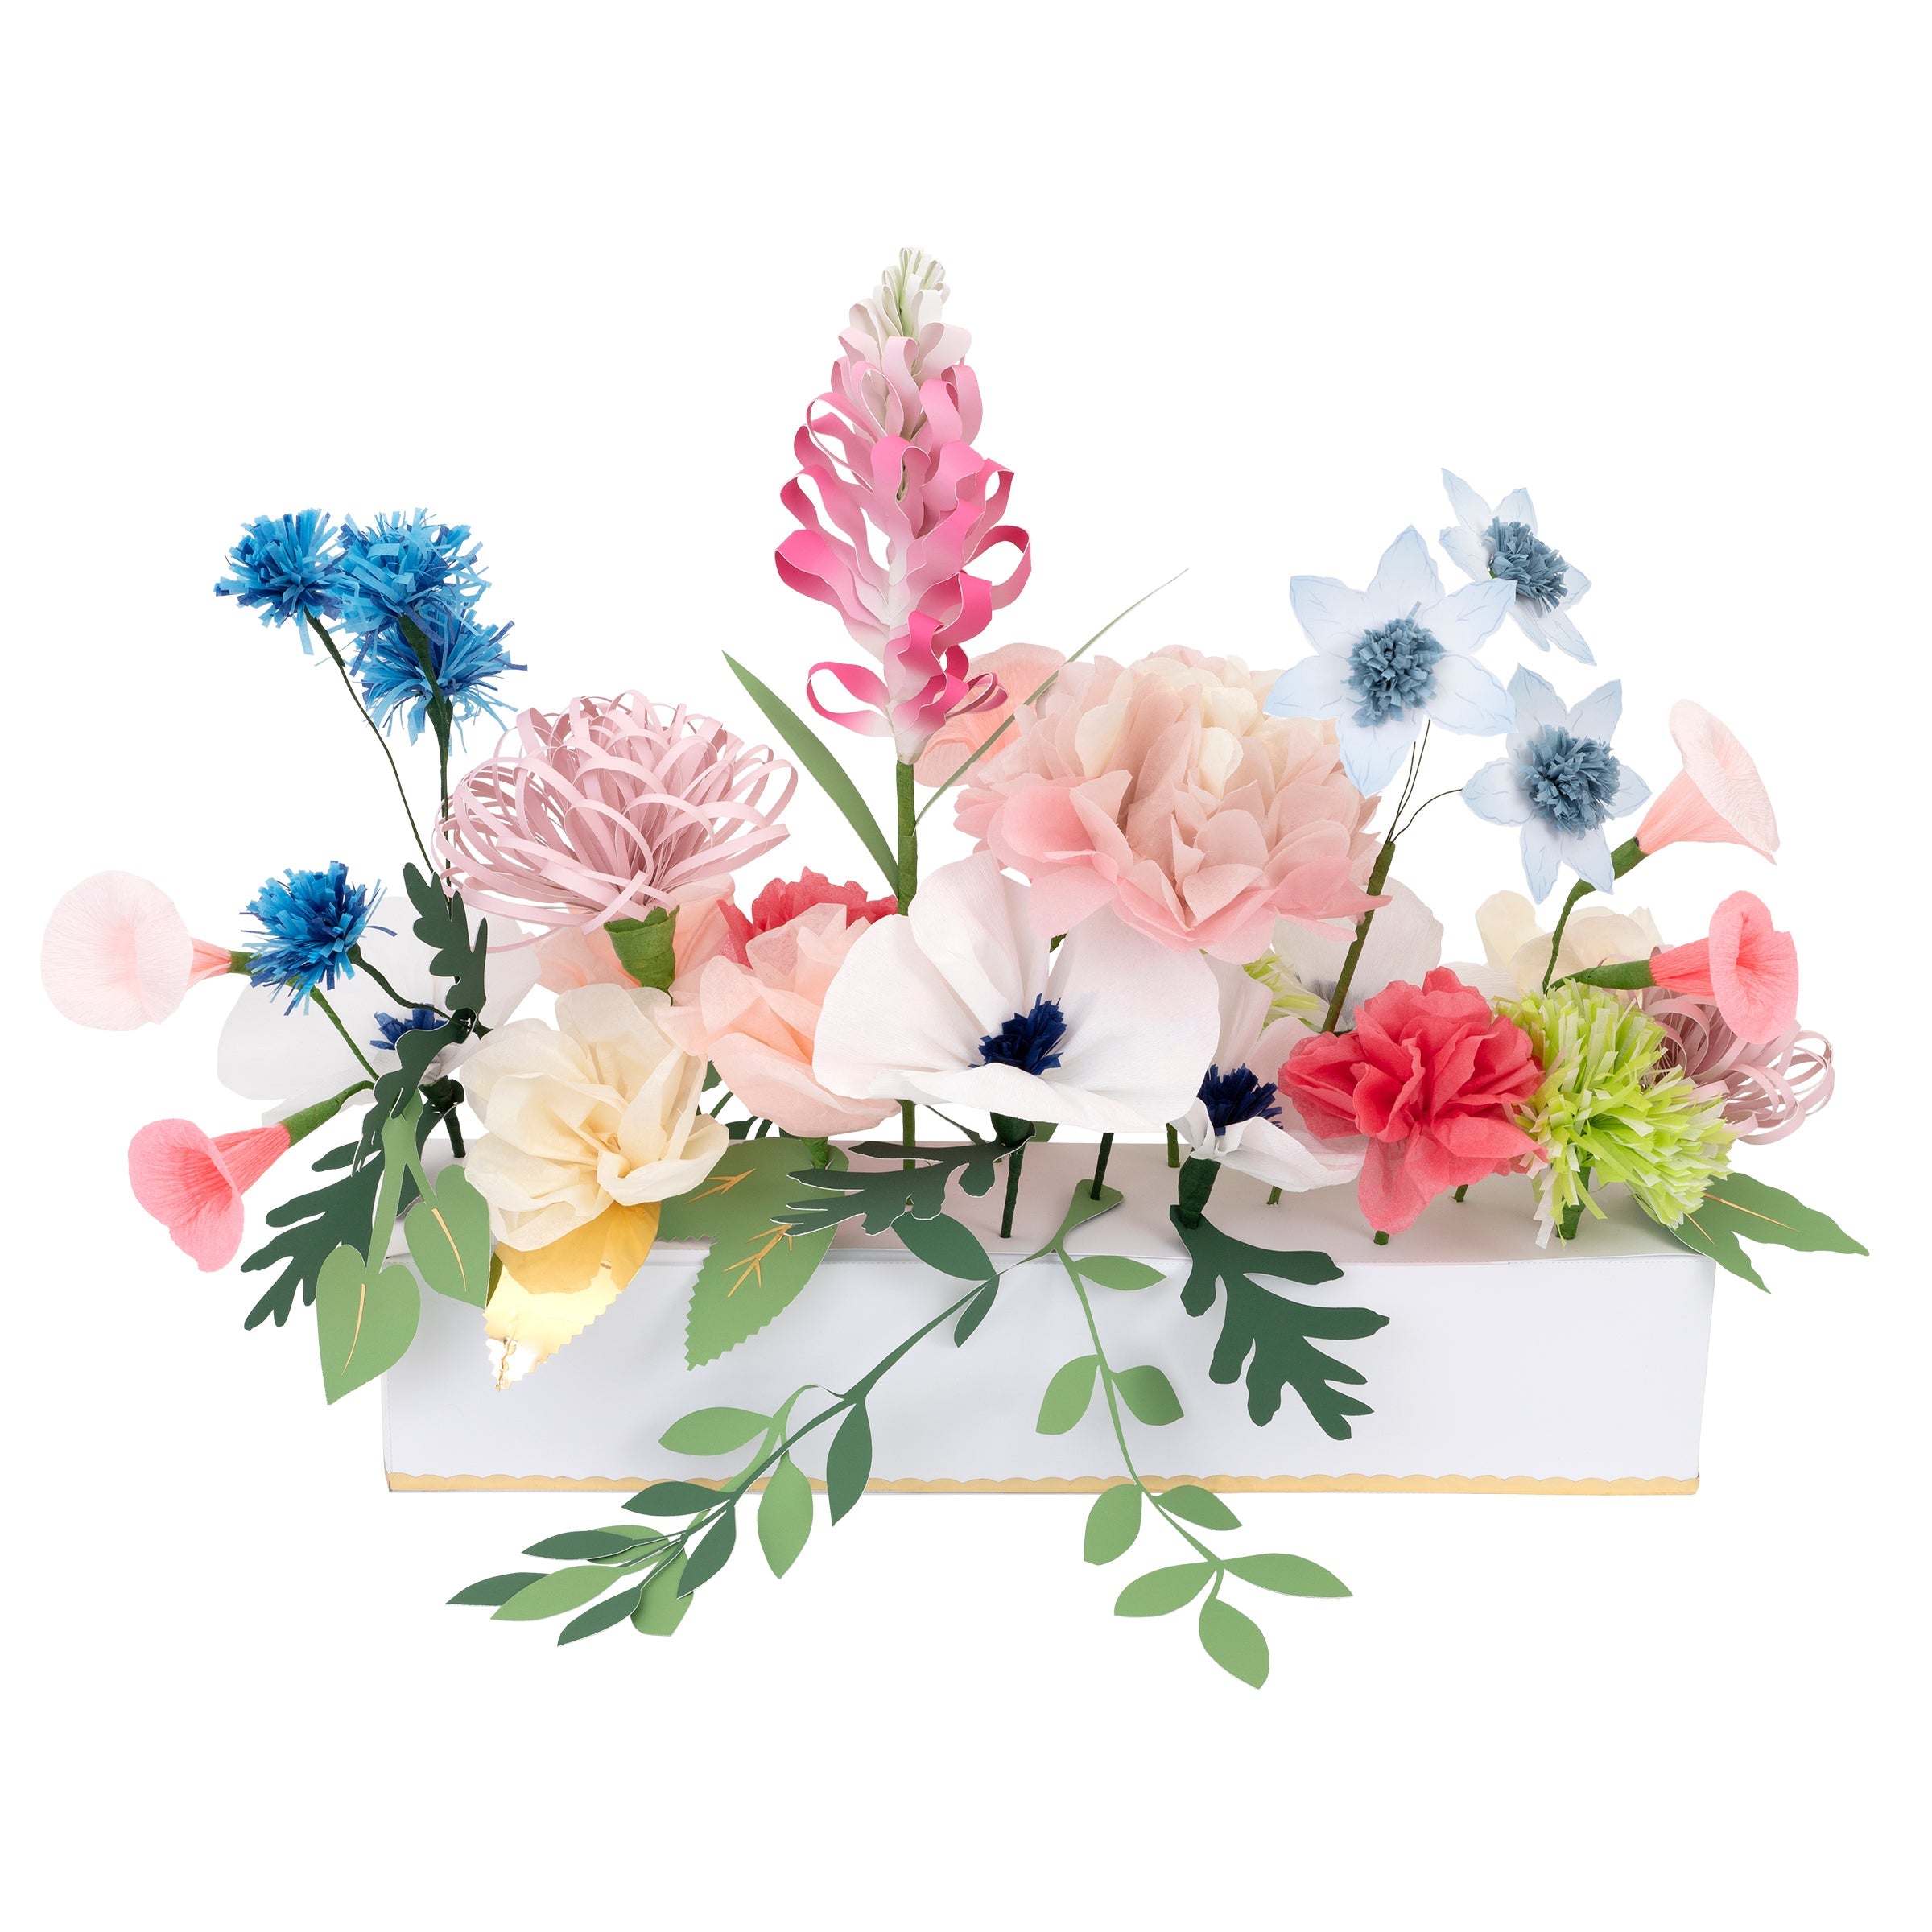 Our beautiful summer table decoration is crafted with stunning paper flowers and leaves.